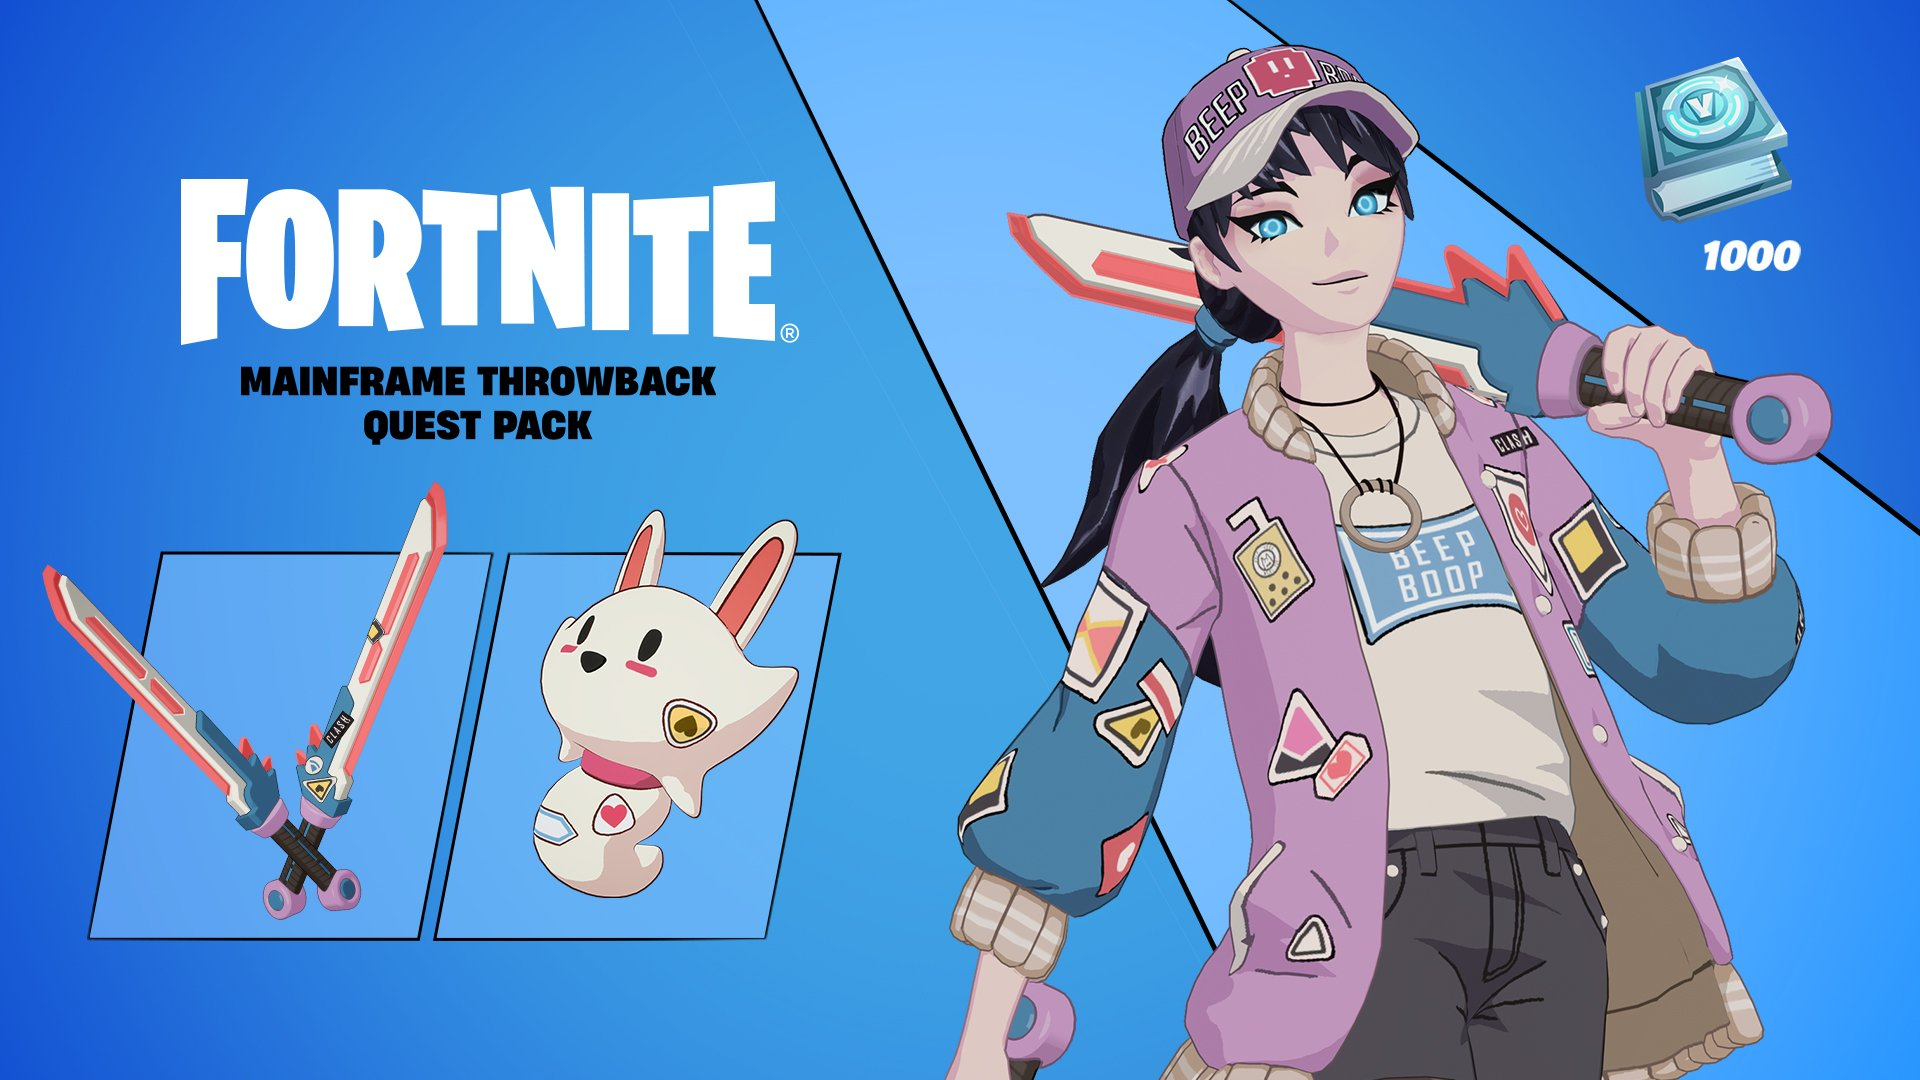 New Mainframe Throwback Quest Pack Available Now